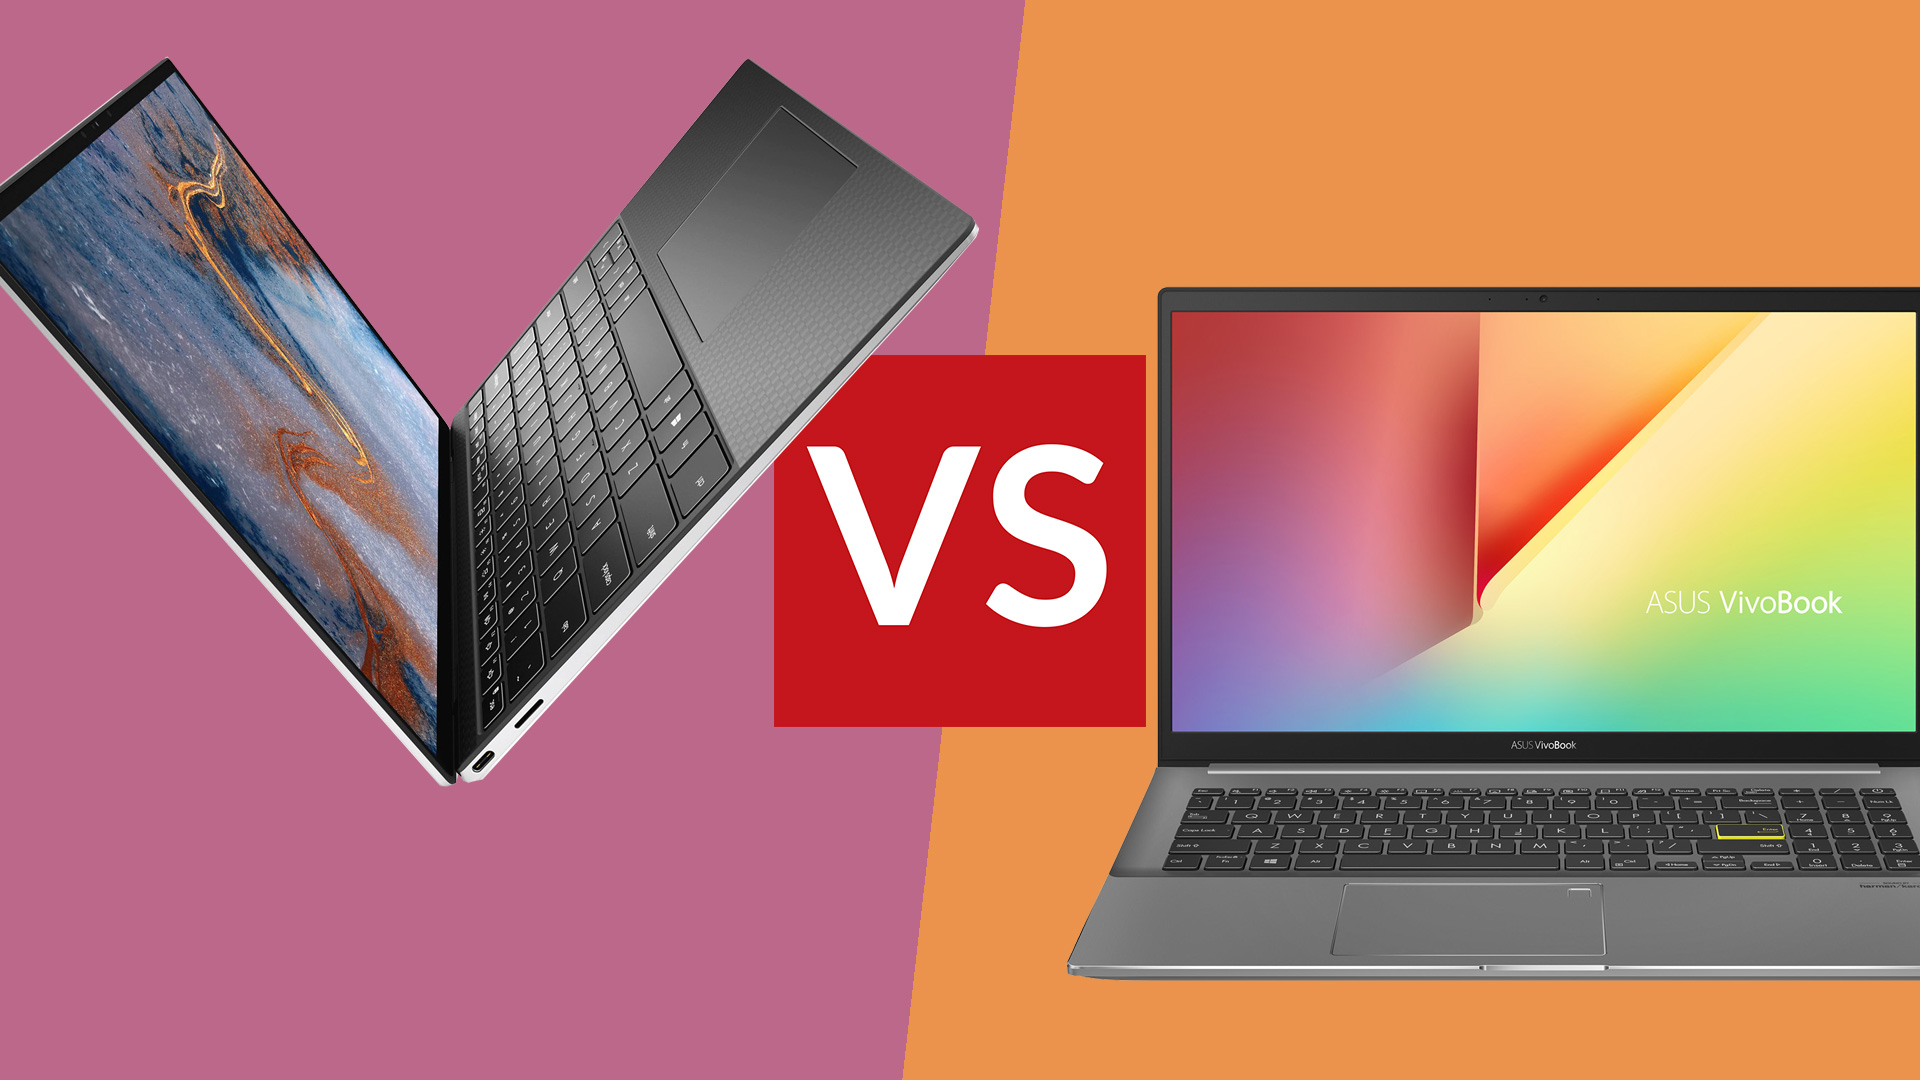 Dell XPS 13 (2020) vs Asus Vivobook S15: which is best?